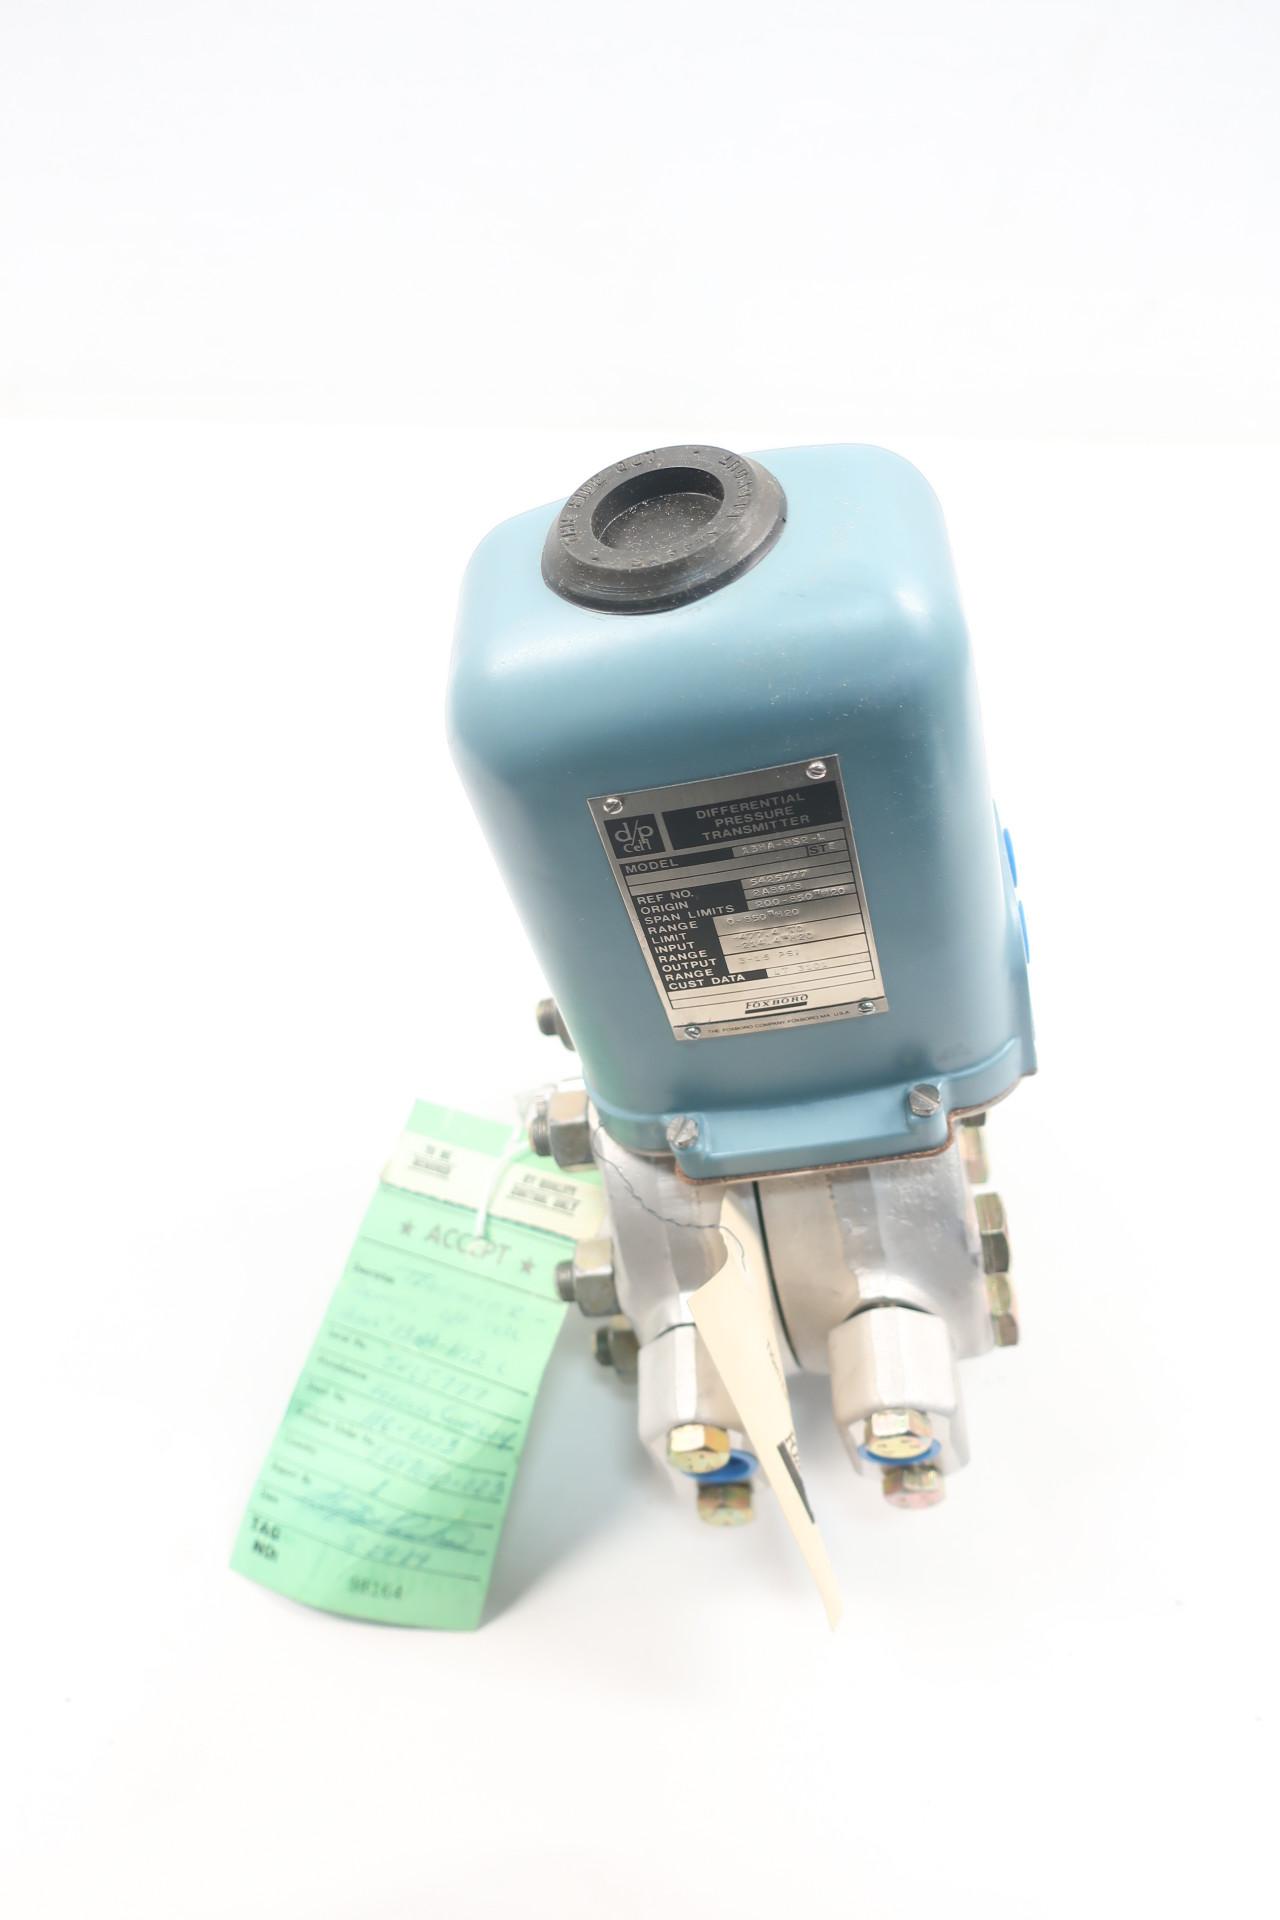 Foxboro 11AM-HS2 Differential Pressure Transmitter 0-1520mm-hg 